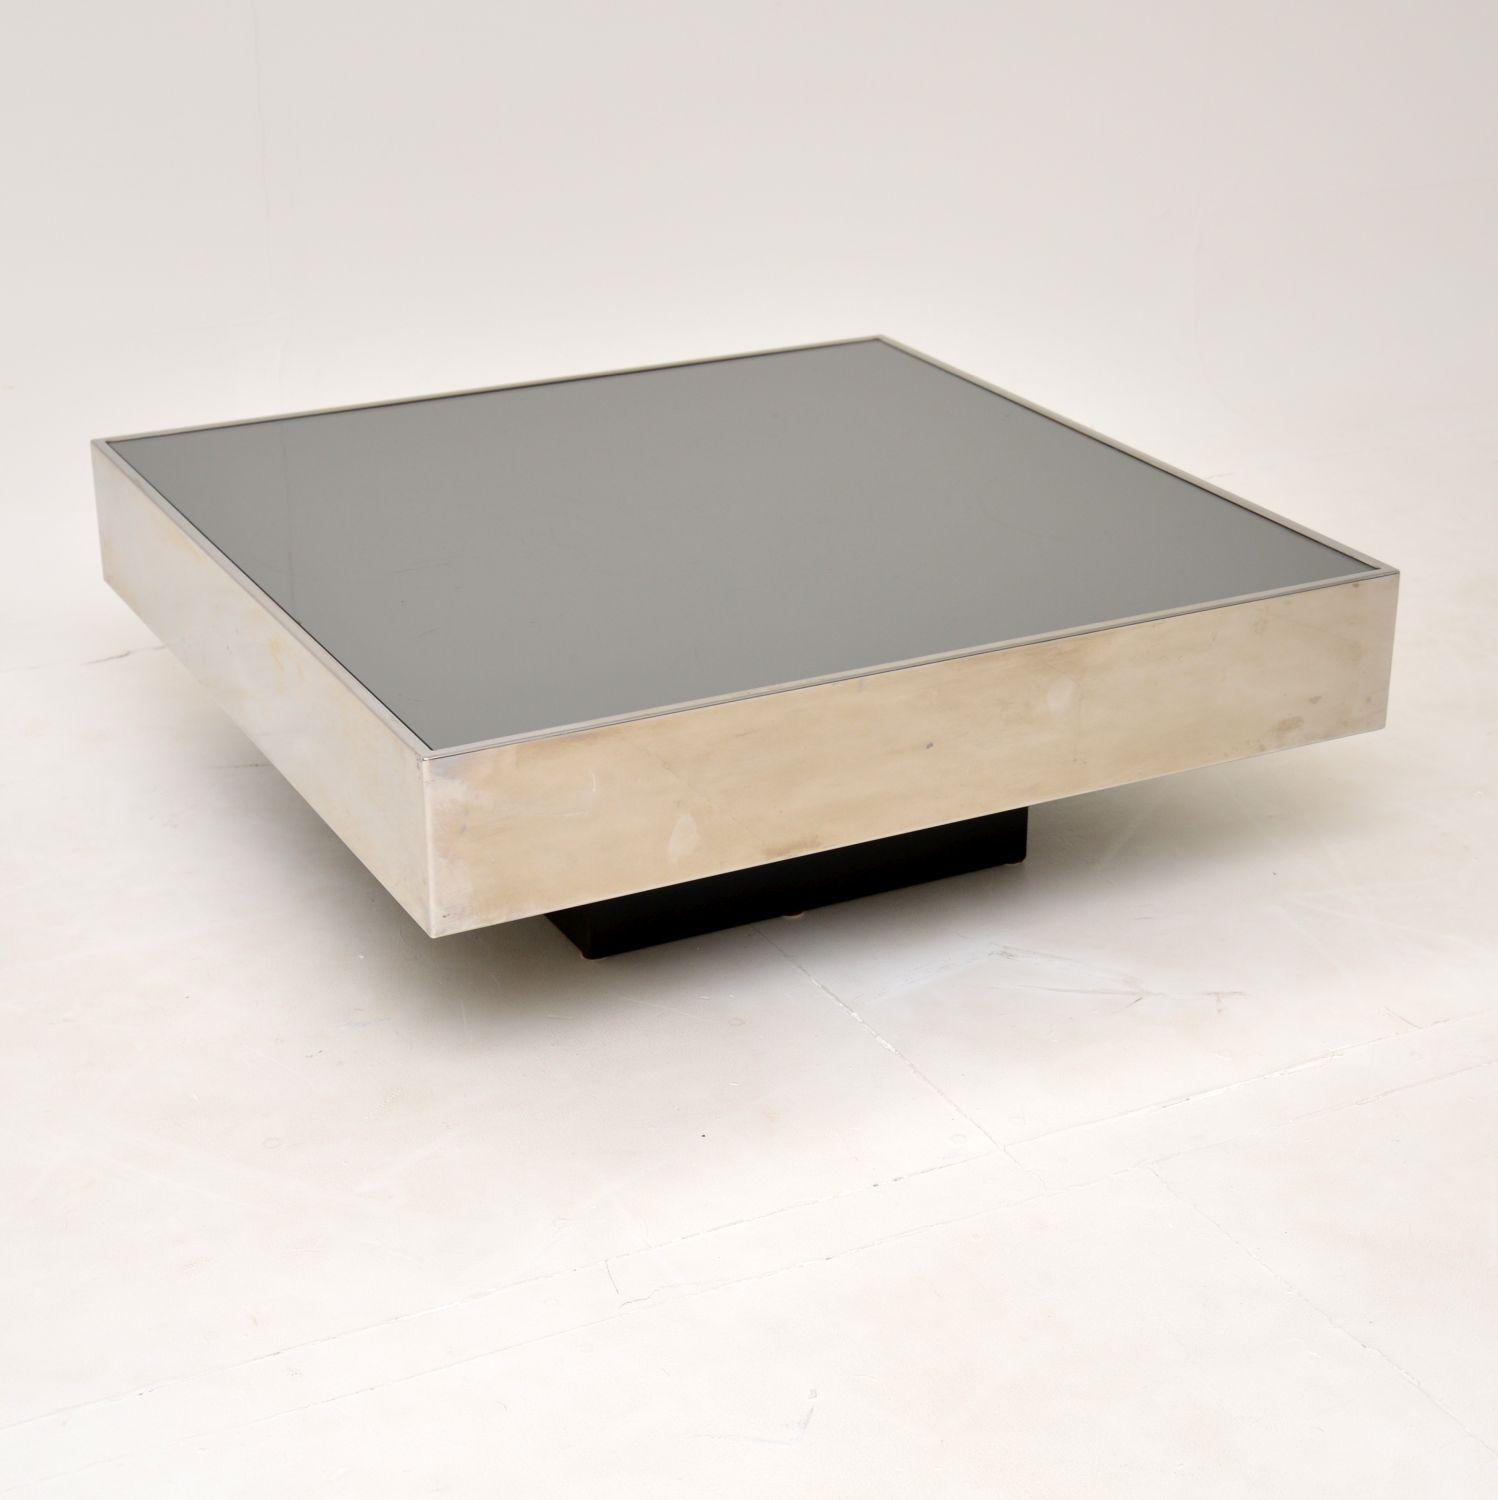 A very stylish and iconic coffee table designed by Willy Rizzo and made by Cidue. This was made in Italy, it dates from the 1970’s. It is of excellent quality and has a beautiful design. The top is mirrored glass with chrome sides, it overhangs a